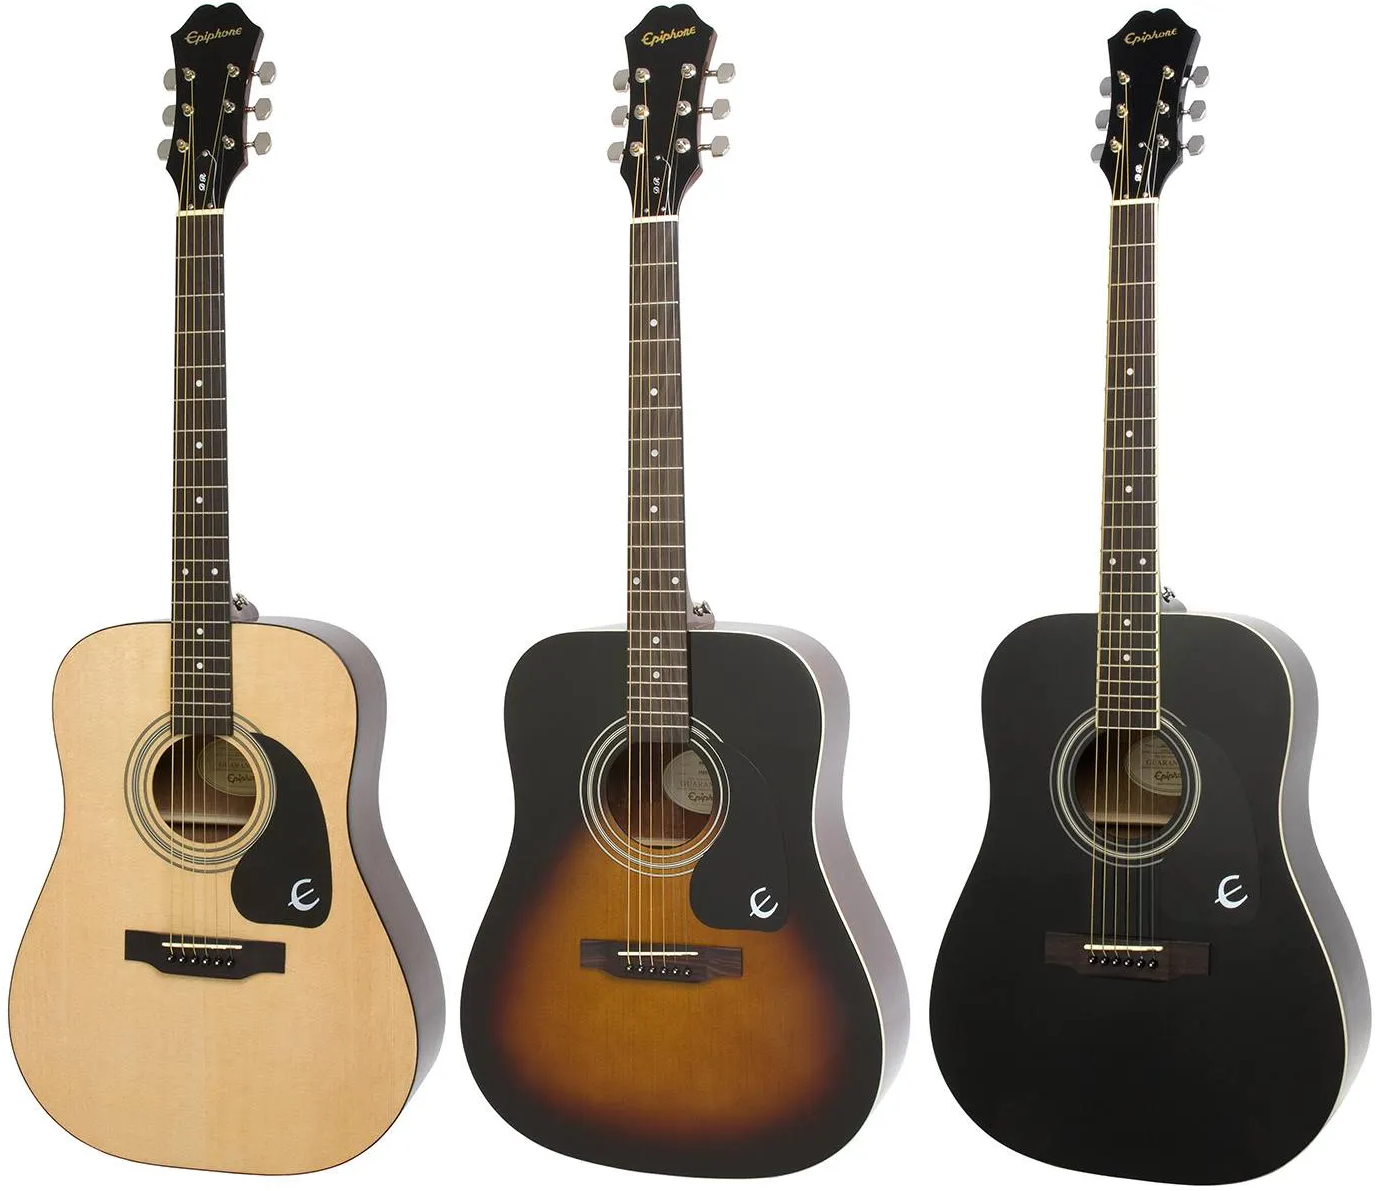 Epiphone DR-100 colors available